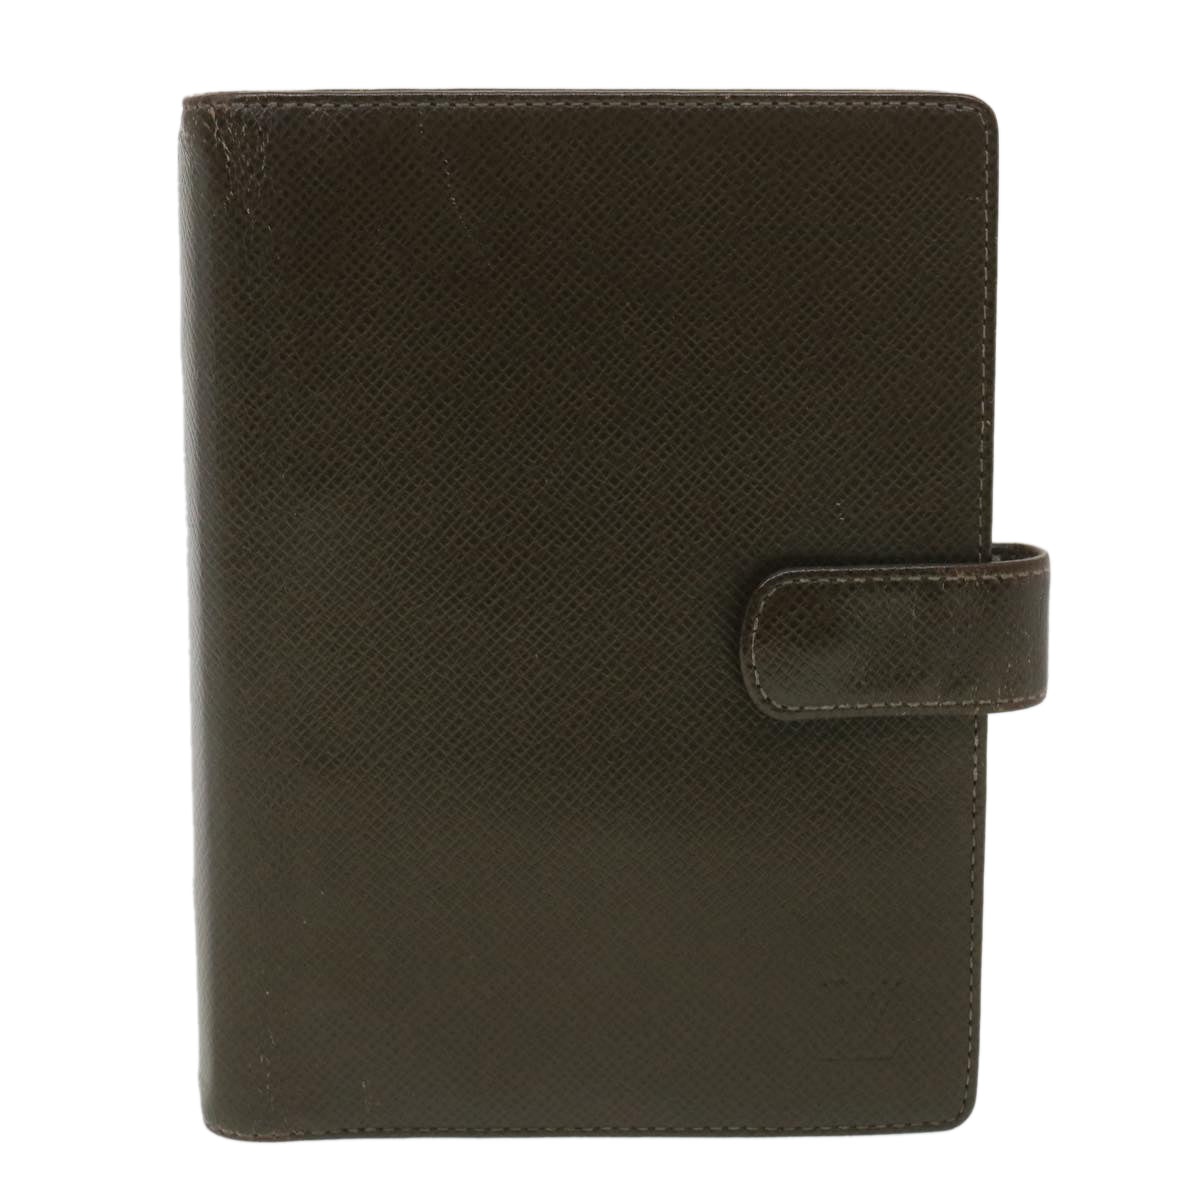 LOUIS VUITTON Taiga Agenda MM Day Planner Cover Grizzly R20426 LV Auth hk642